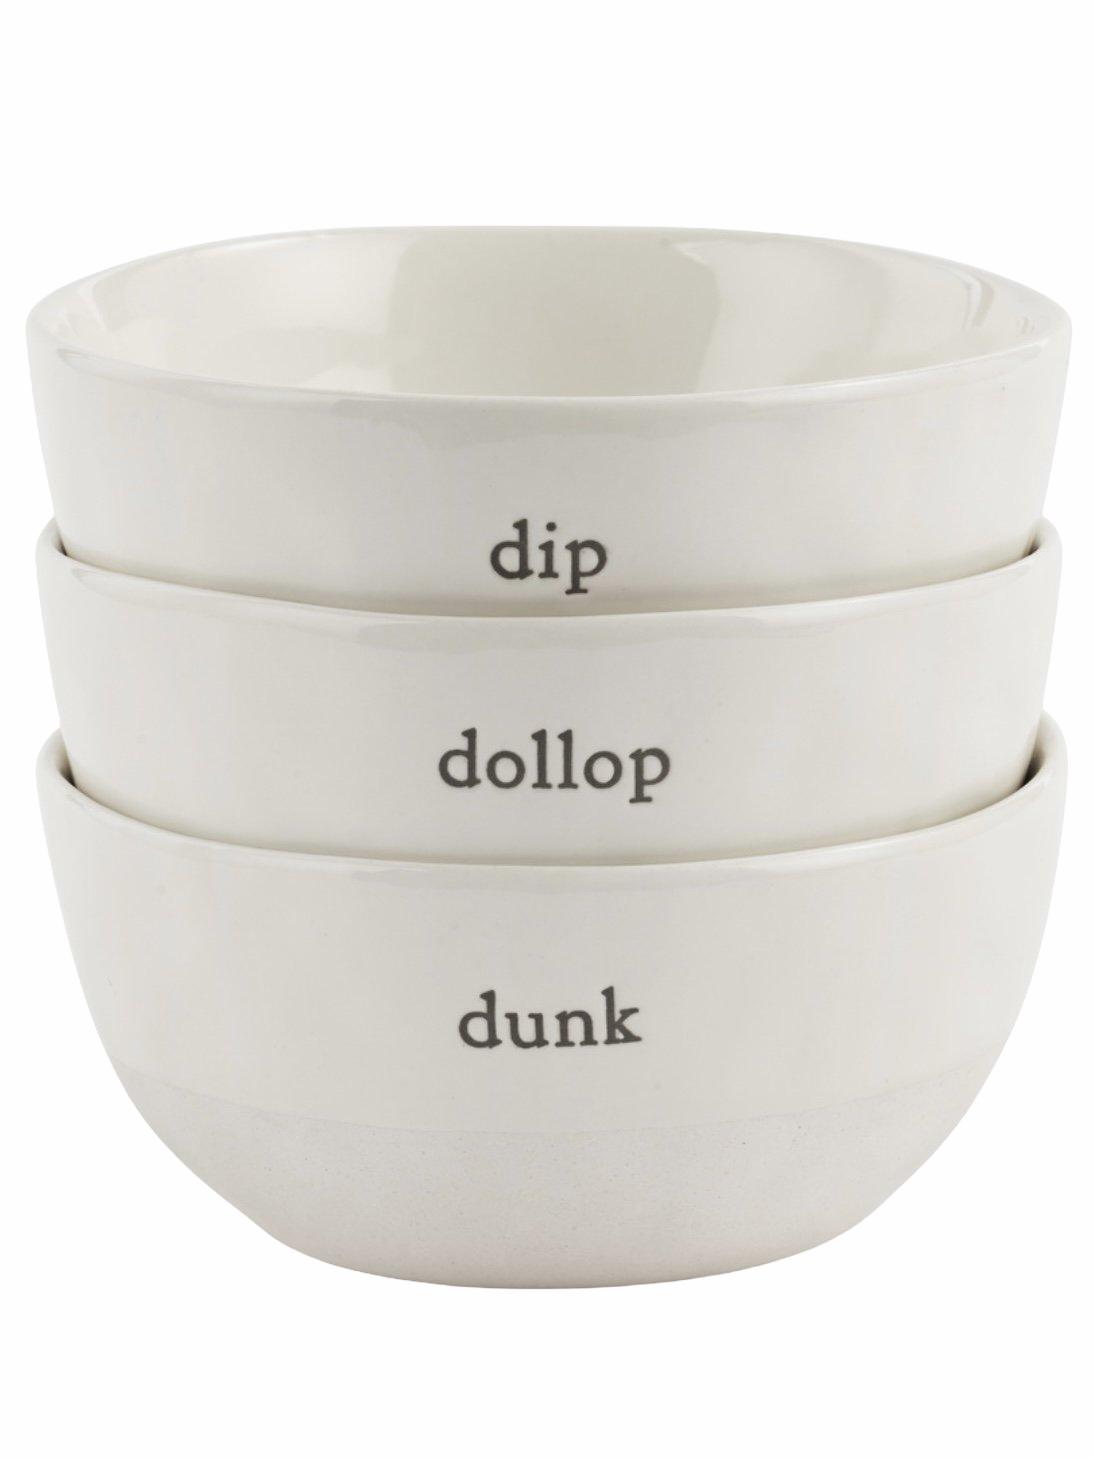 Dollop Dipping Bowls - Set of 3 *Pickup Only Item